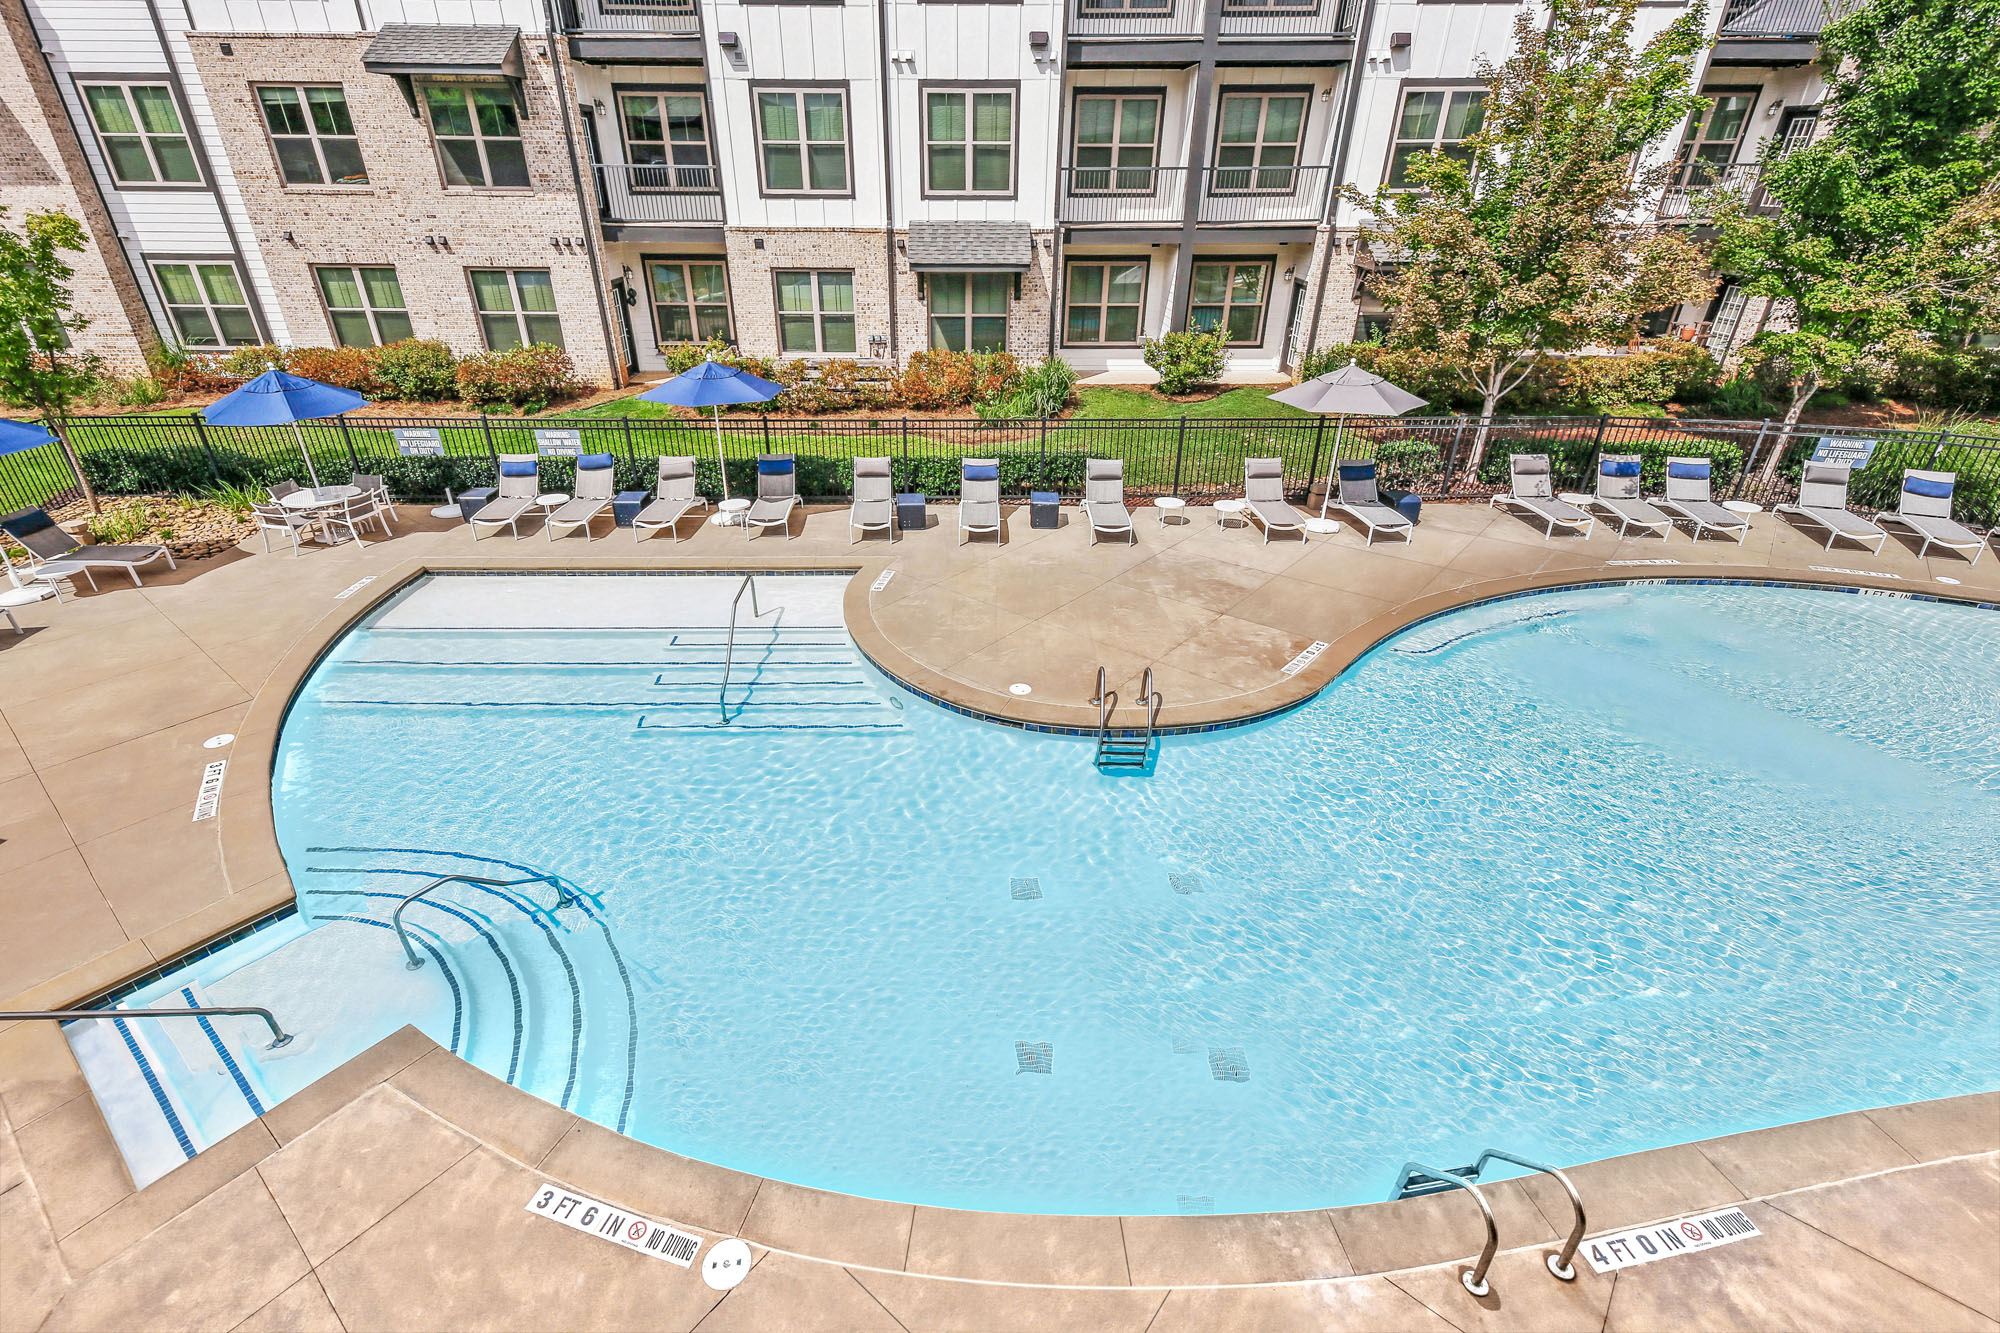 An overhead shot of the pool at Park 9 apartments in Woodstock, GA.